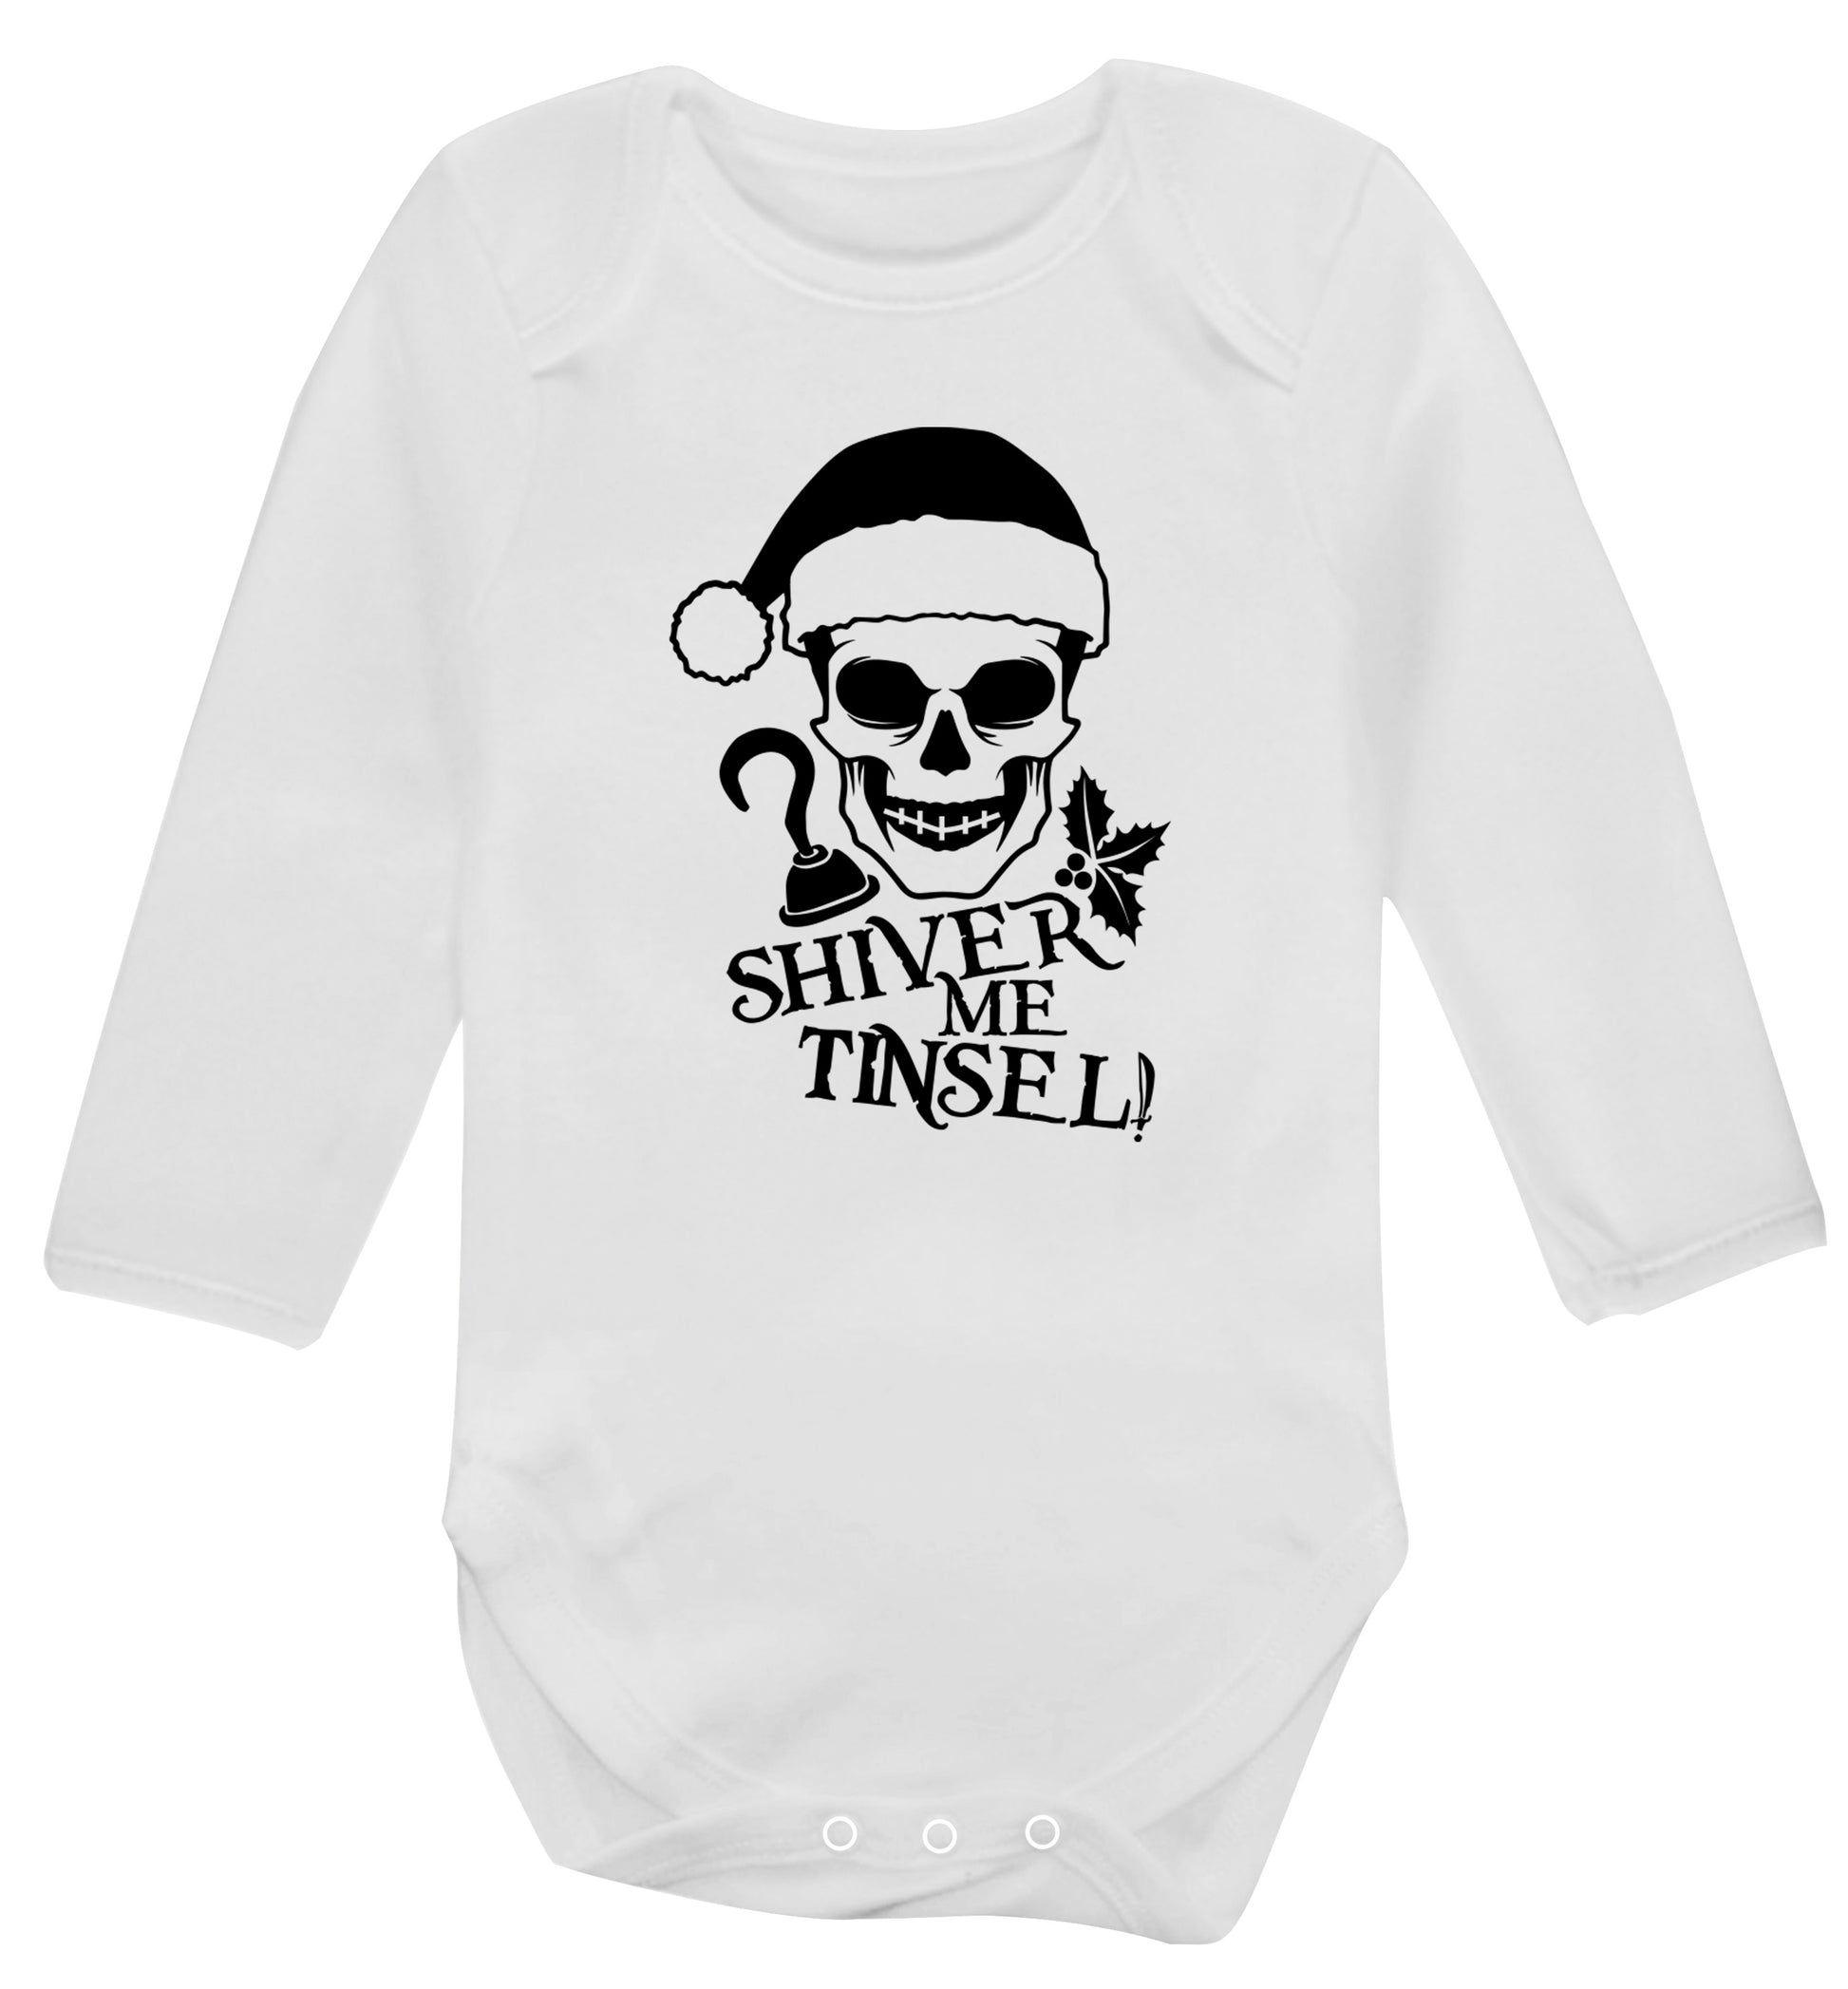 Shiver me tinsel Baby Vest long sleeved white 6-12 months